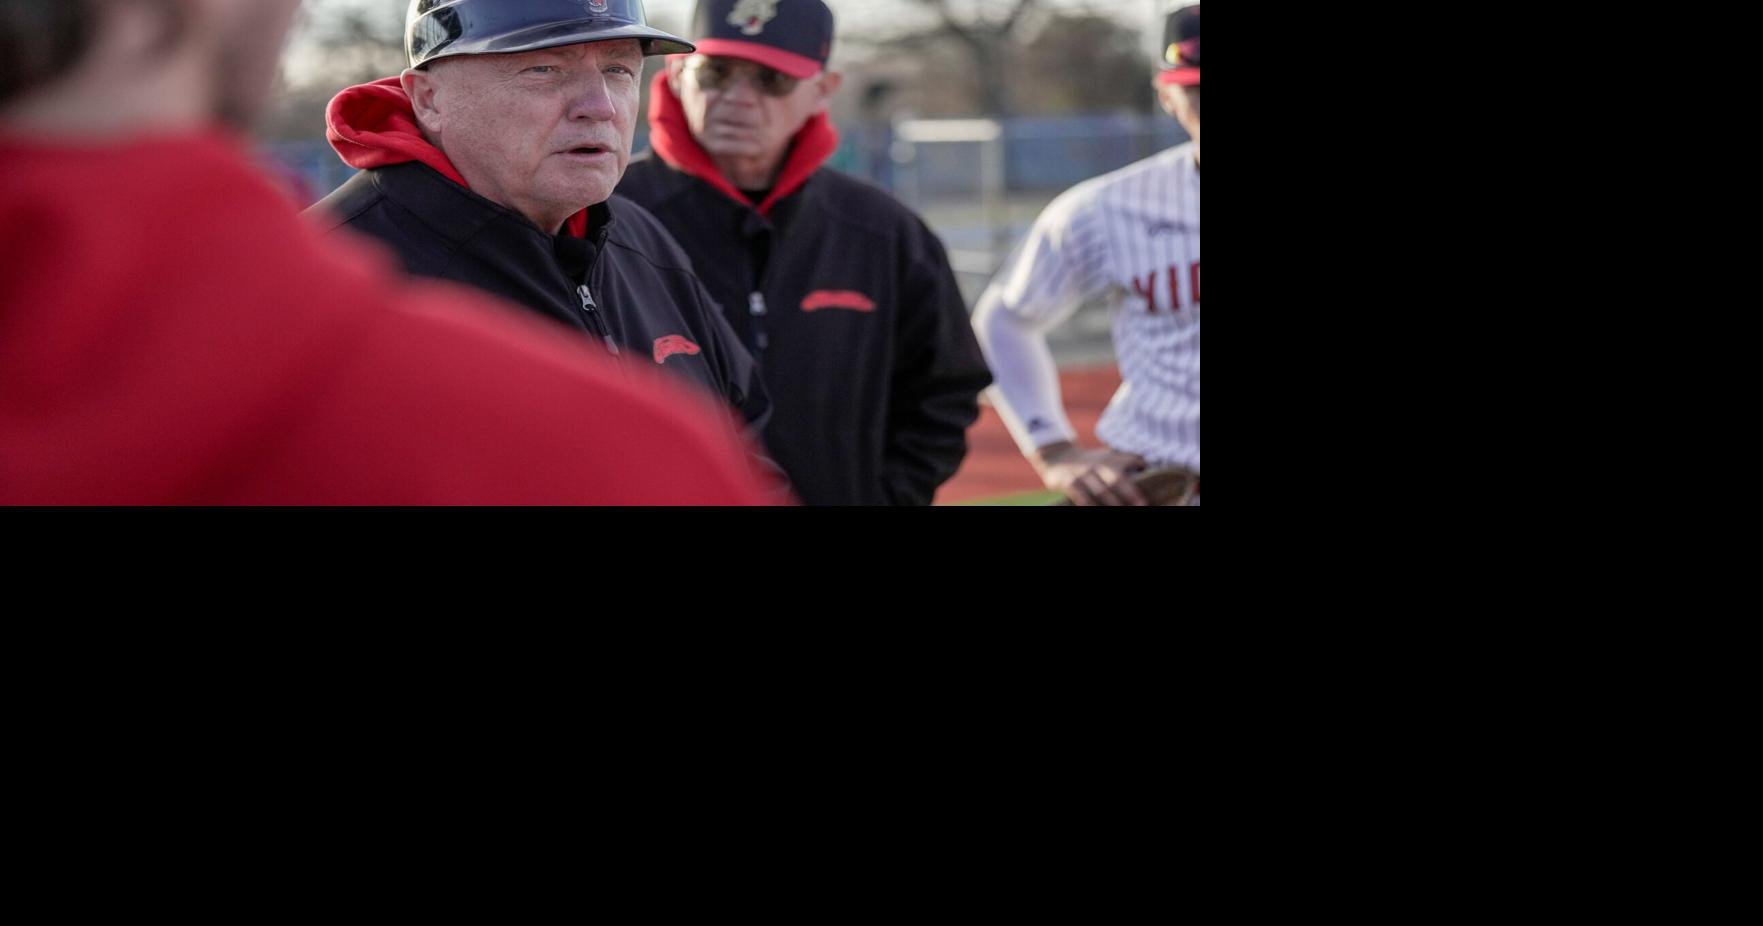 UHV's Puhl to retire at end of season | Advosports | victoriaadvocate ...